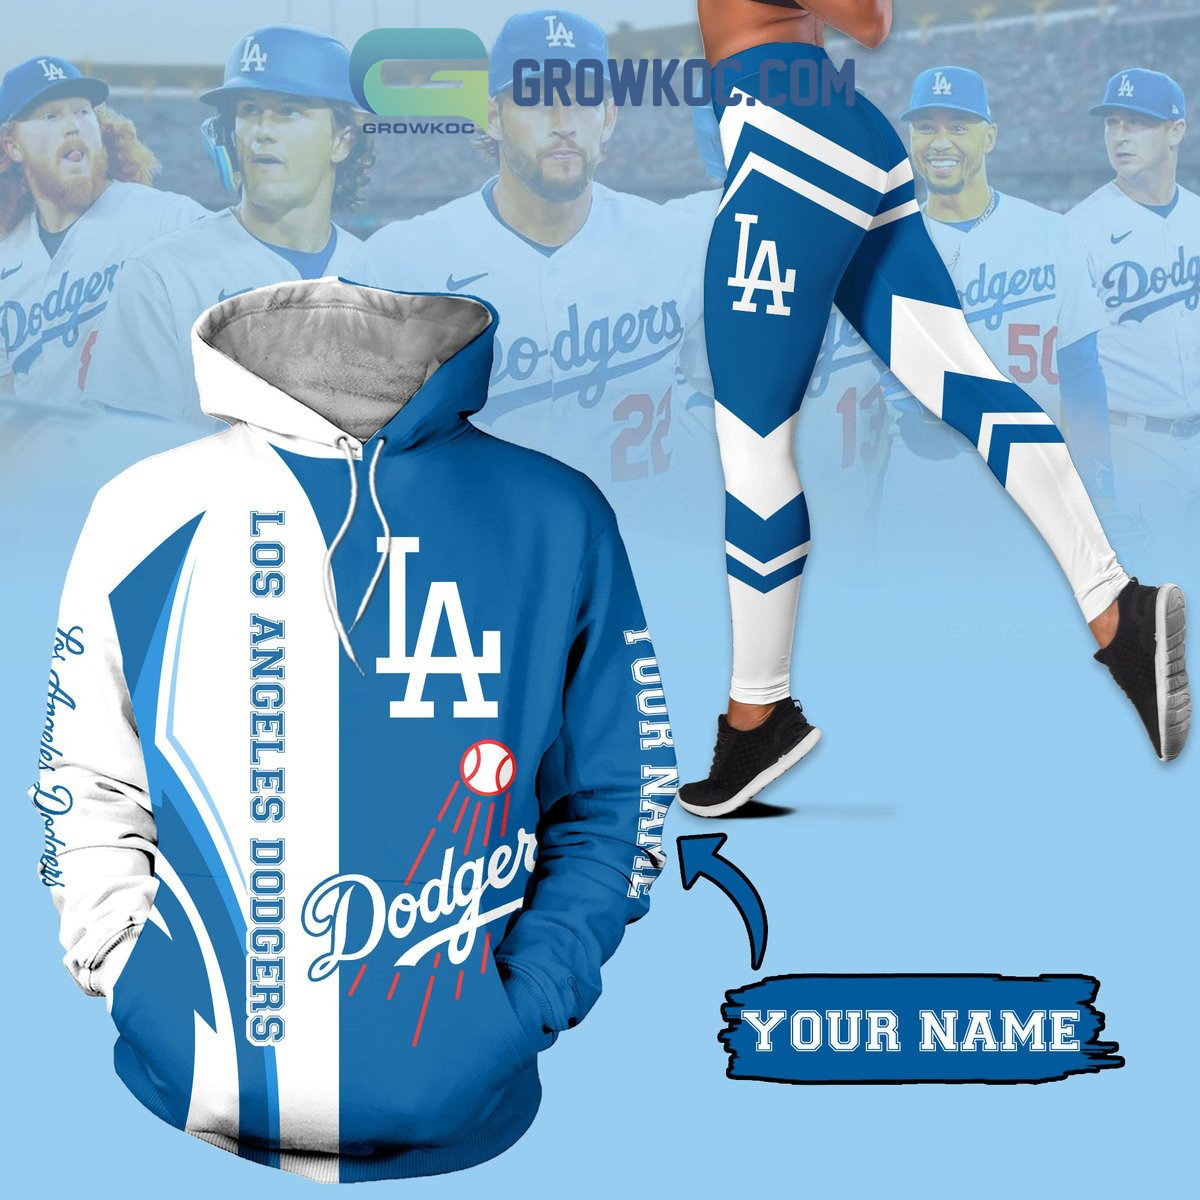 Mookie Betts YOUTH Los Angeles Dodgers Jersey white – Classic